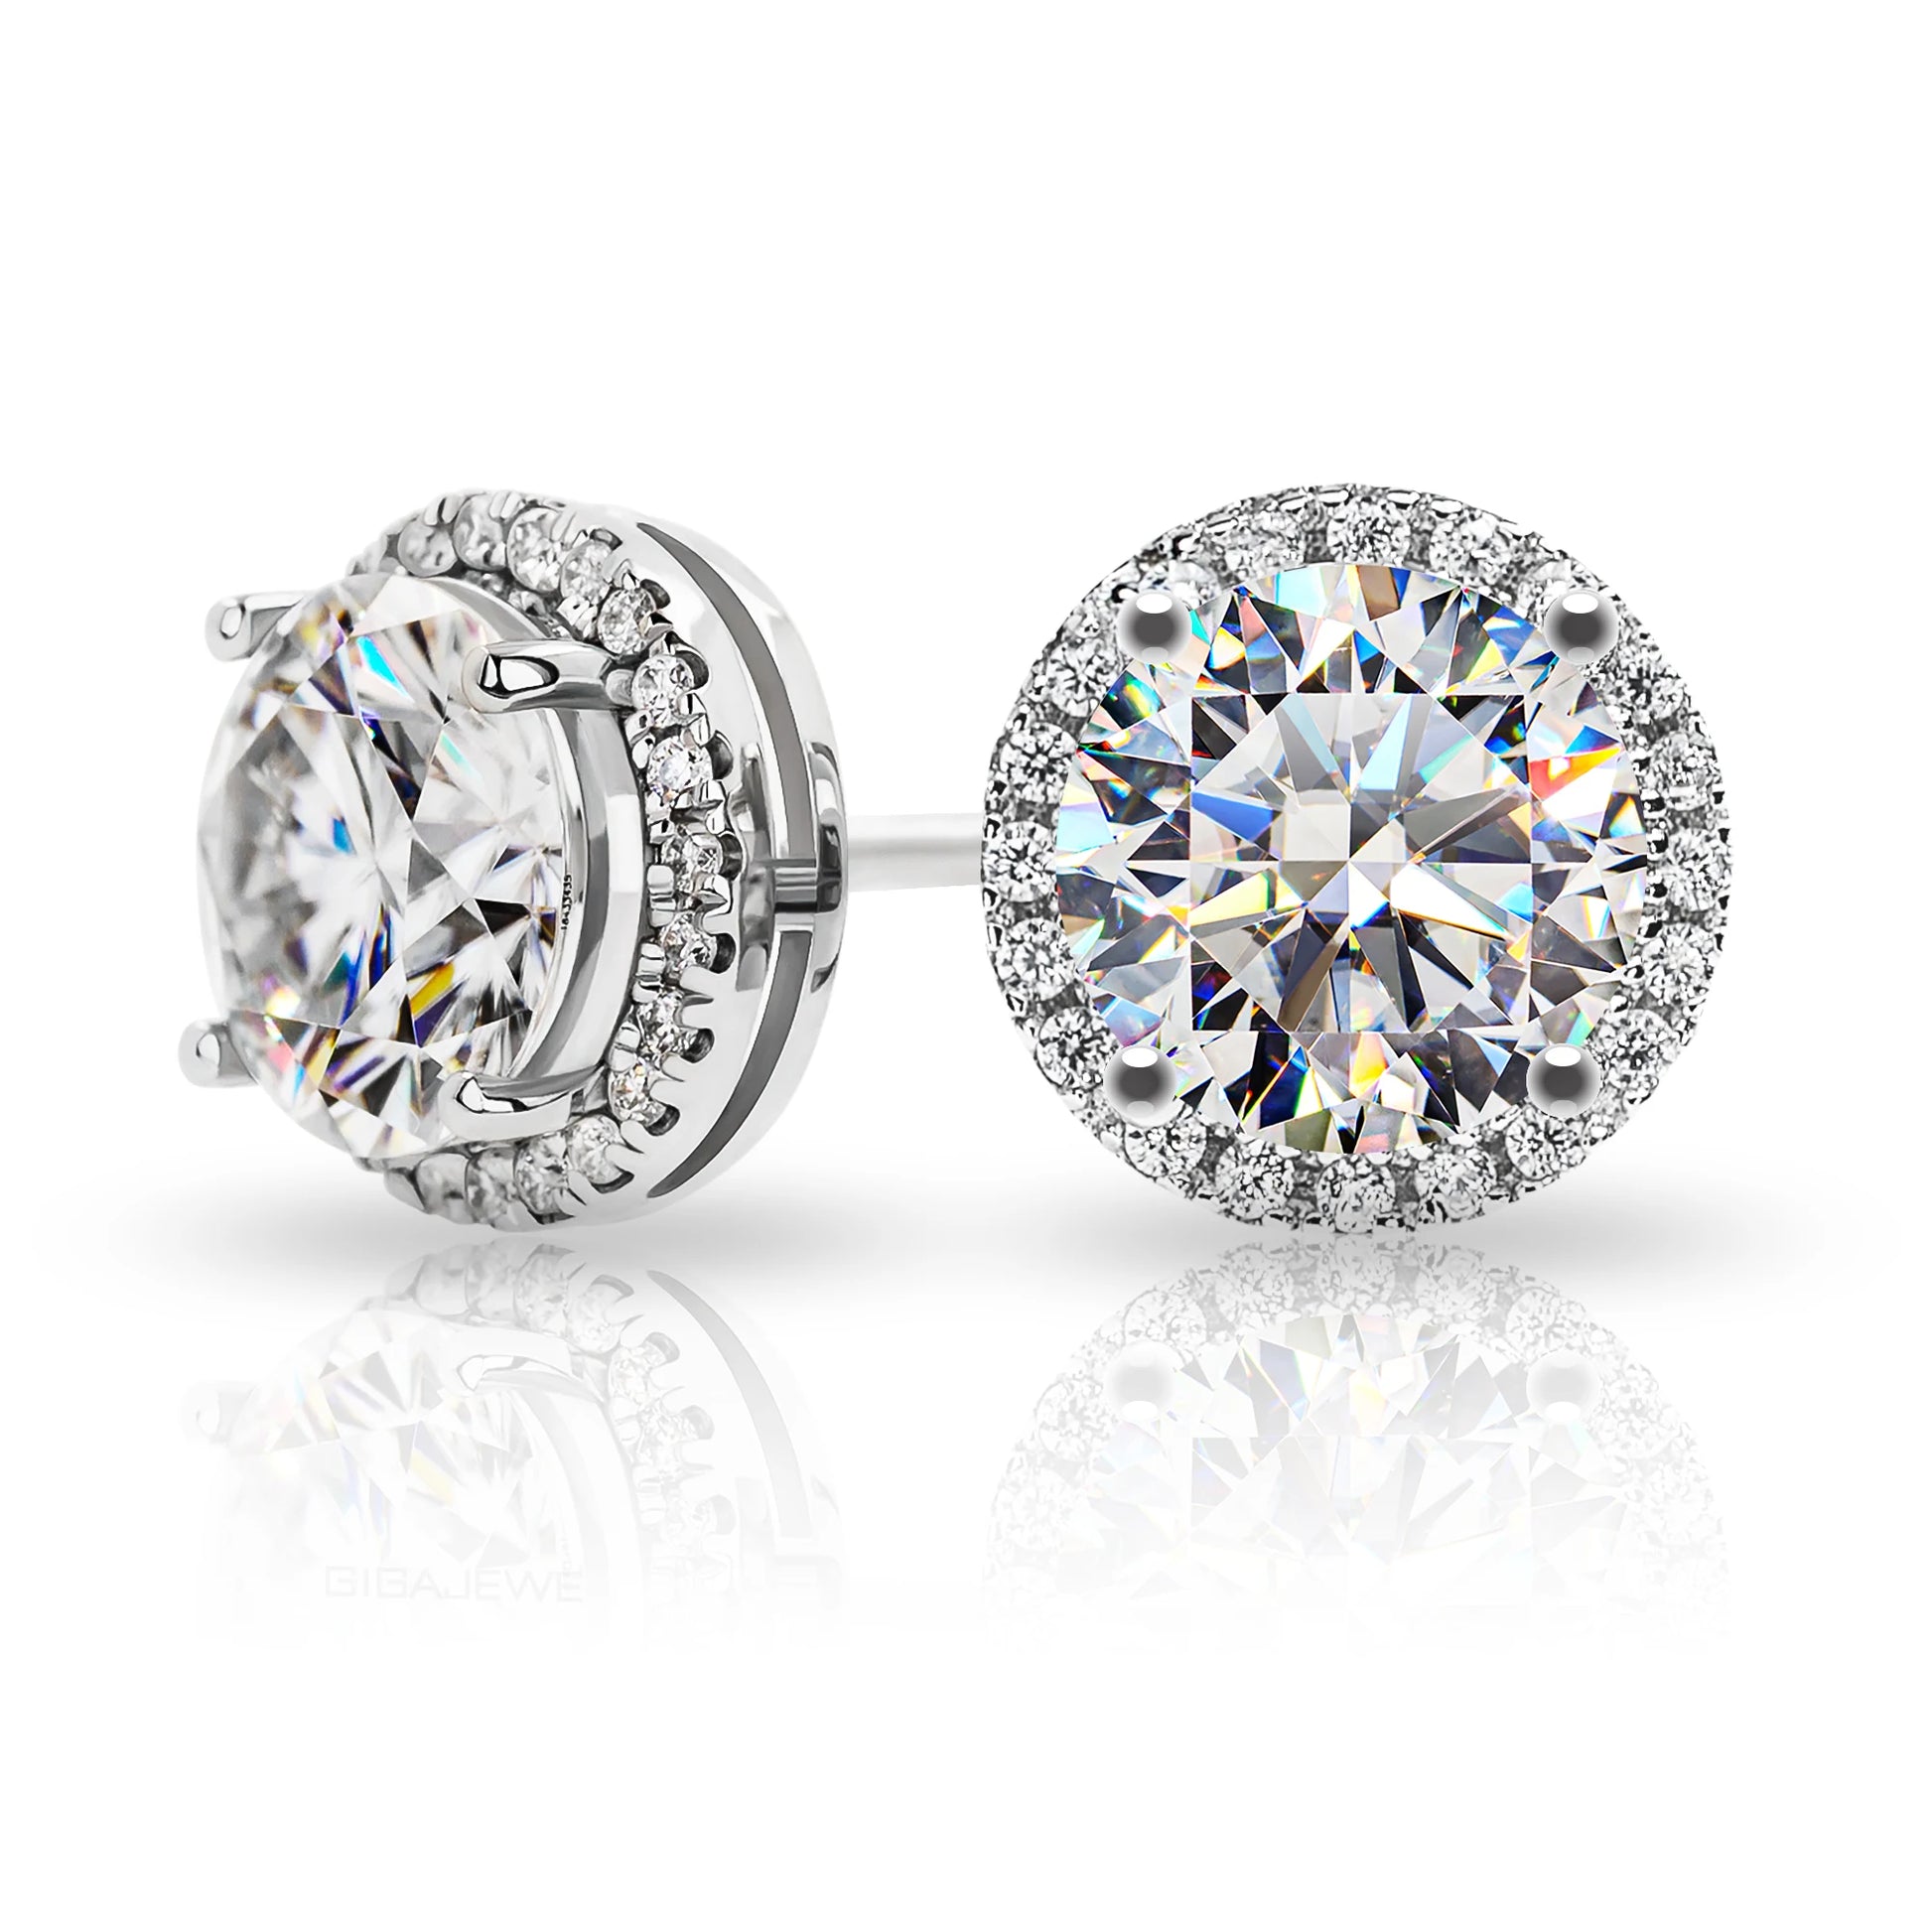 GIGAJEWE Moissanite Hot Selling Items Earrings D Color VVS1 S925 Silver 18K Gold Plated Jewelry Woman Gift White D Color